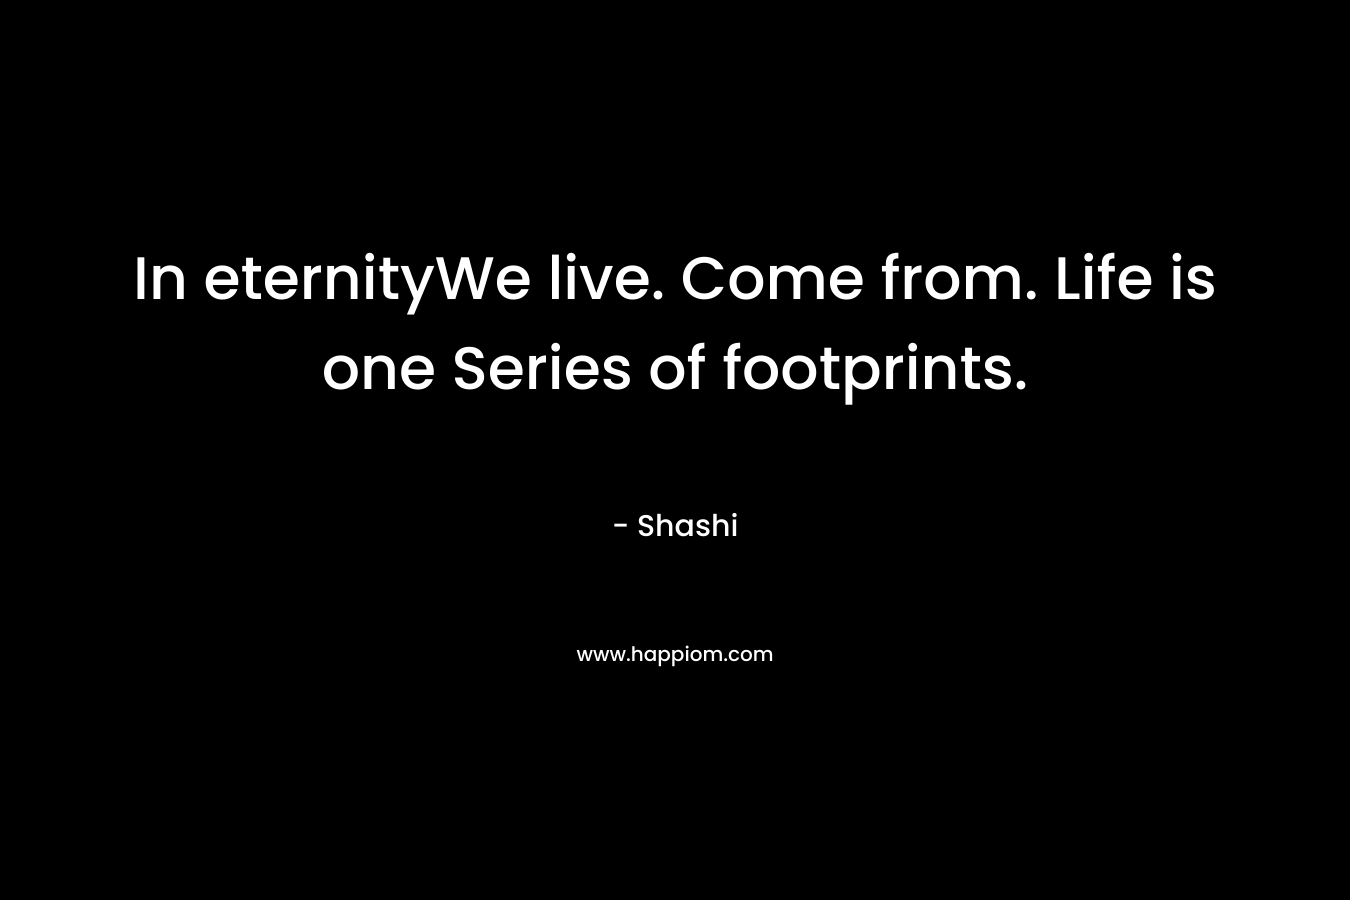 In eternityWe live. Come from. Life is one Series of footprints. – Shashi